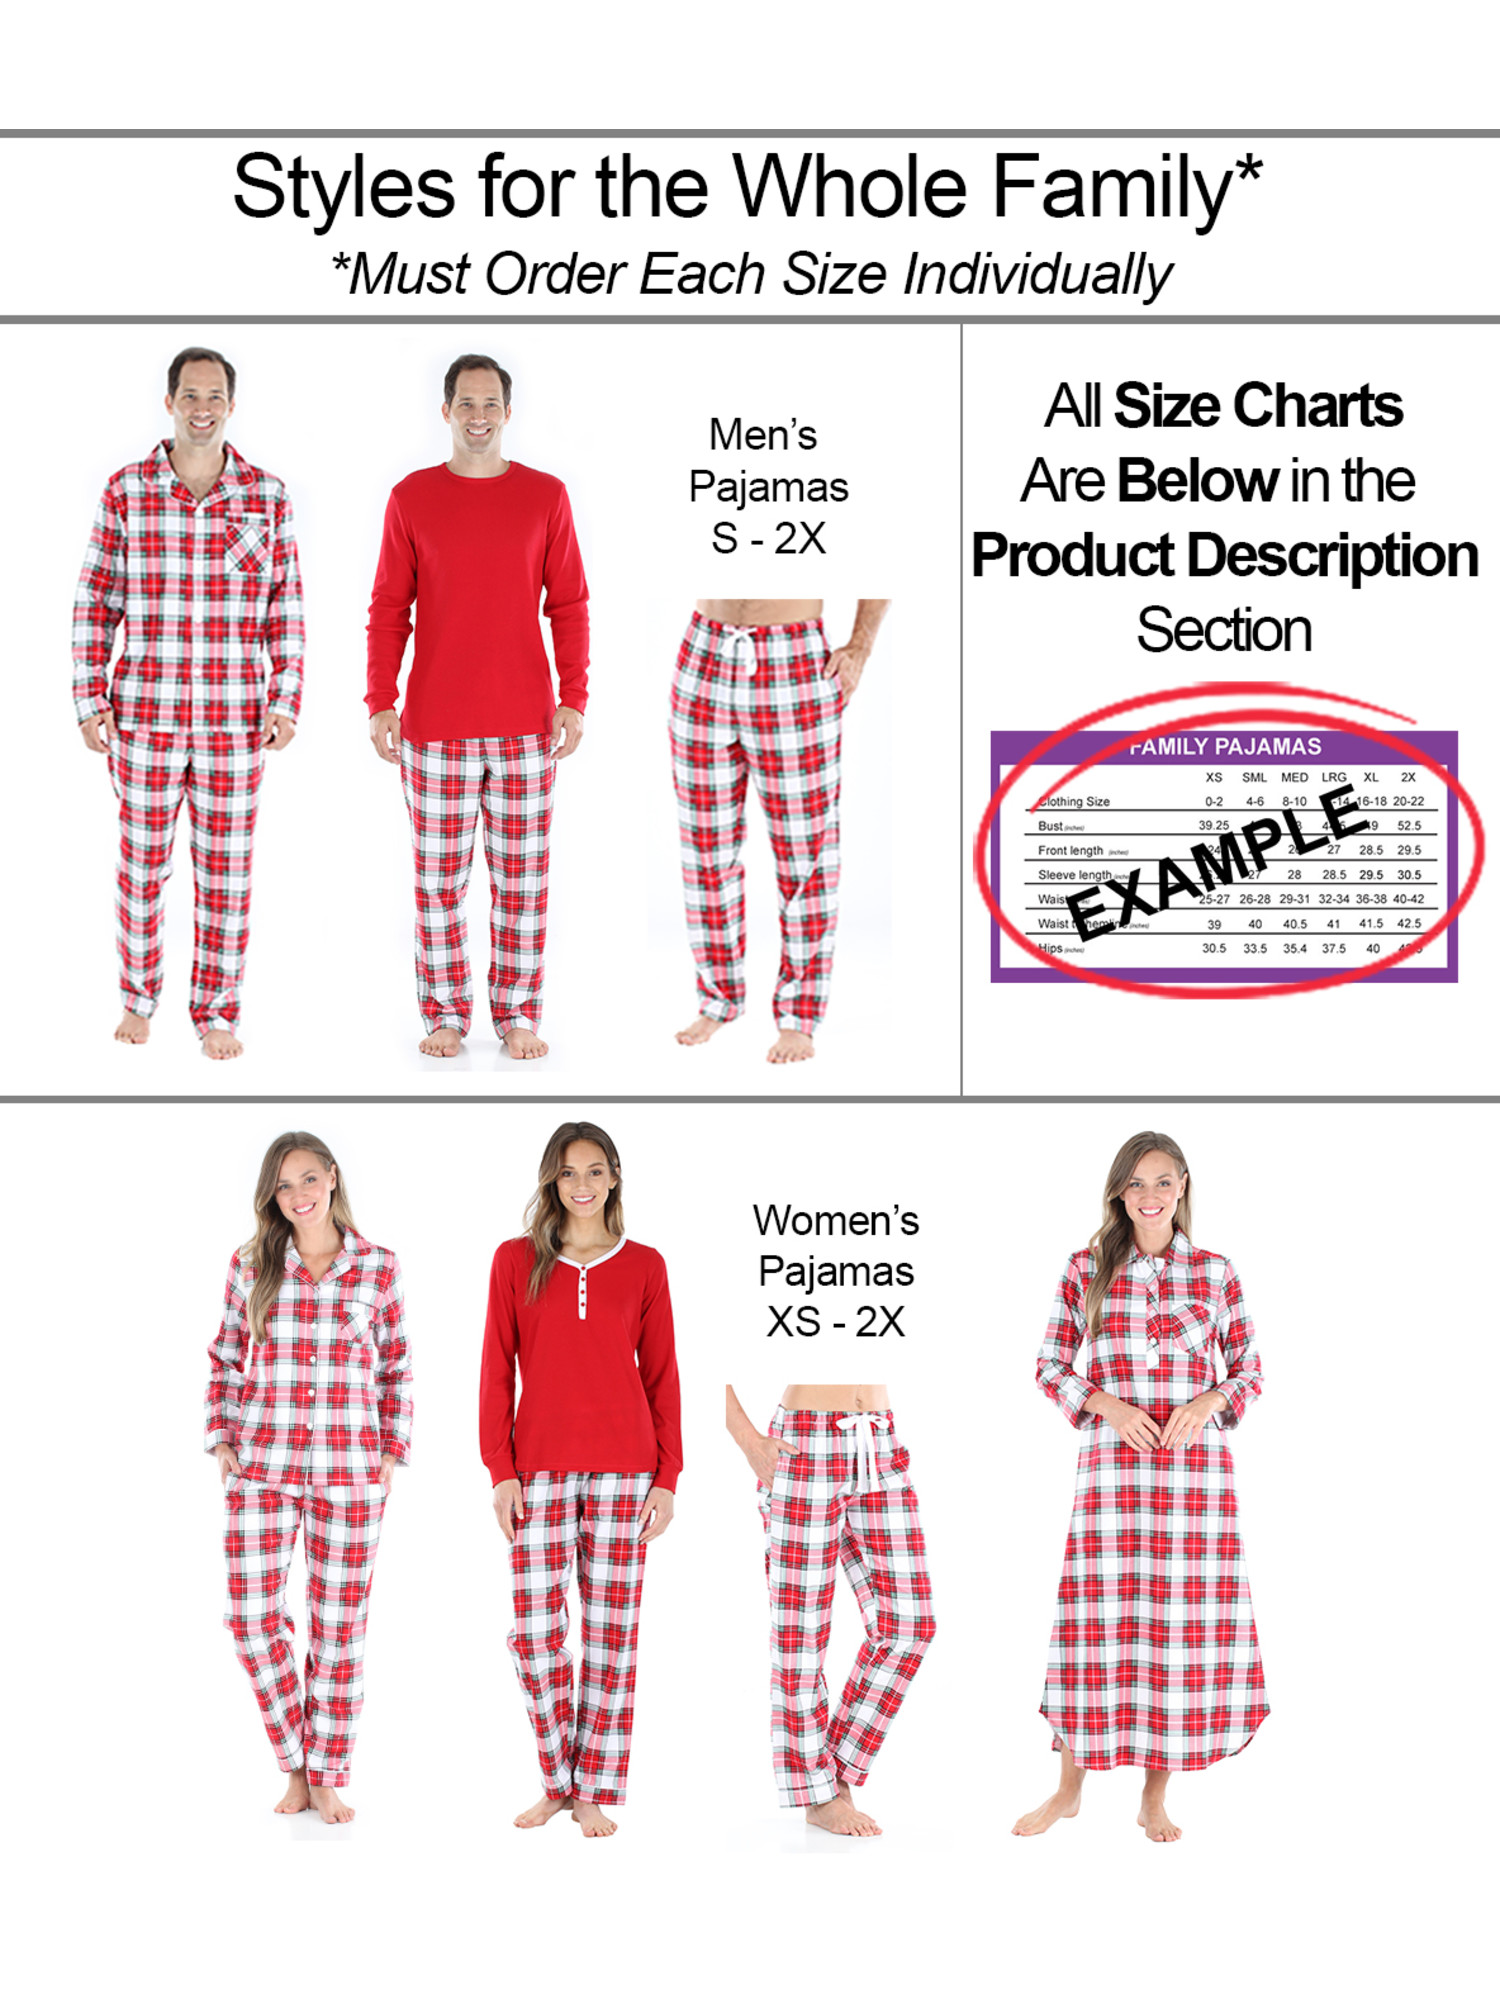 SleepytimePJs Matching Family Christmas Pajama Sets, Red & White Plaid Flannel - image 4 of 6